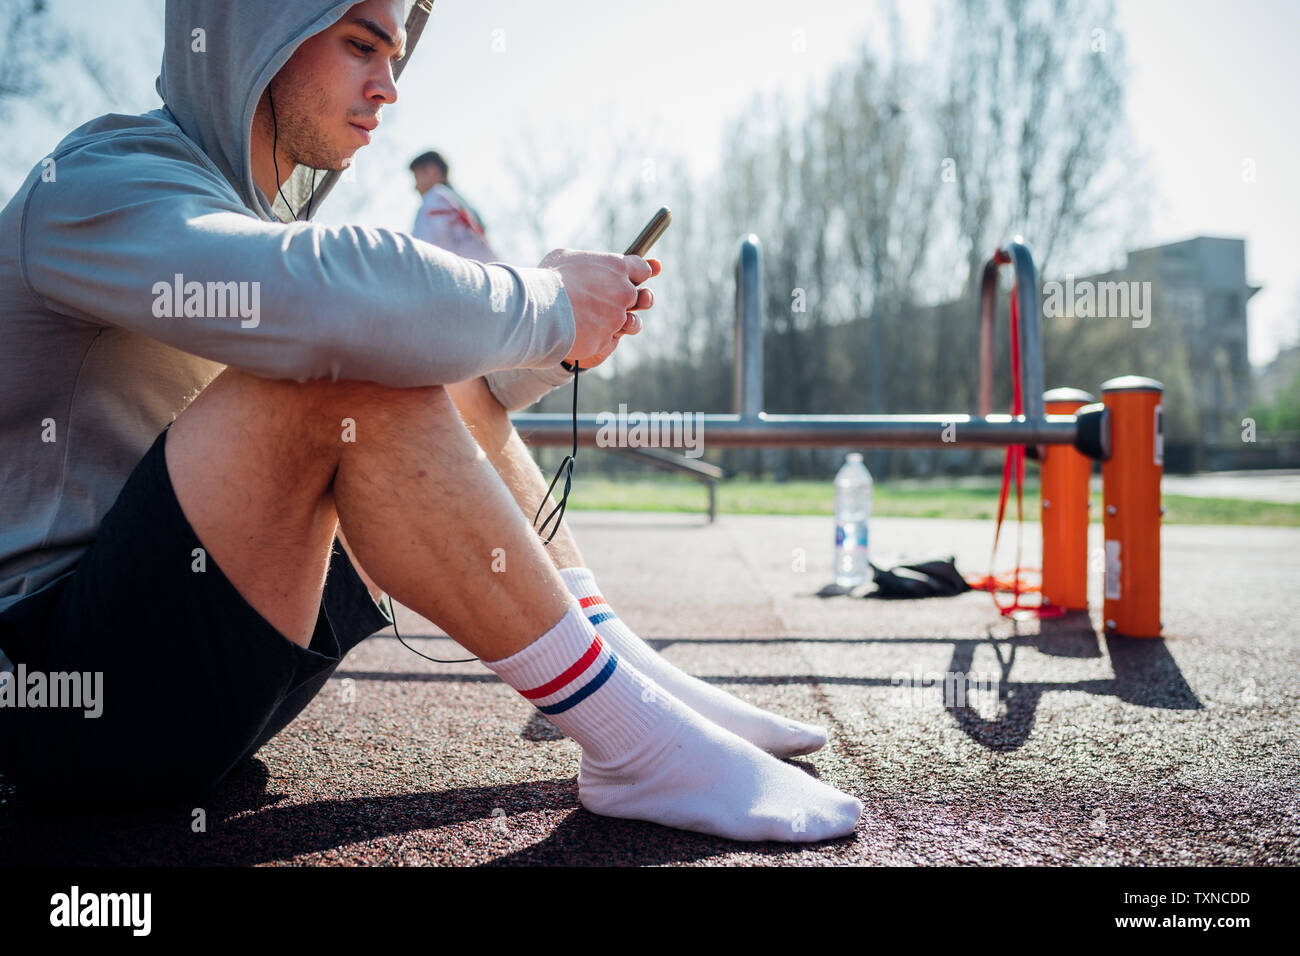 Calisthenics class at outdoor gym, young man sitting down and looking at smartphone Stock Photo